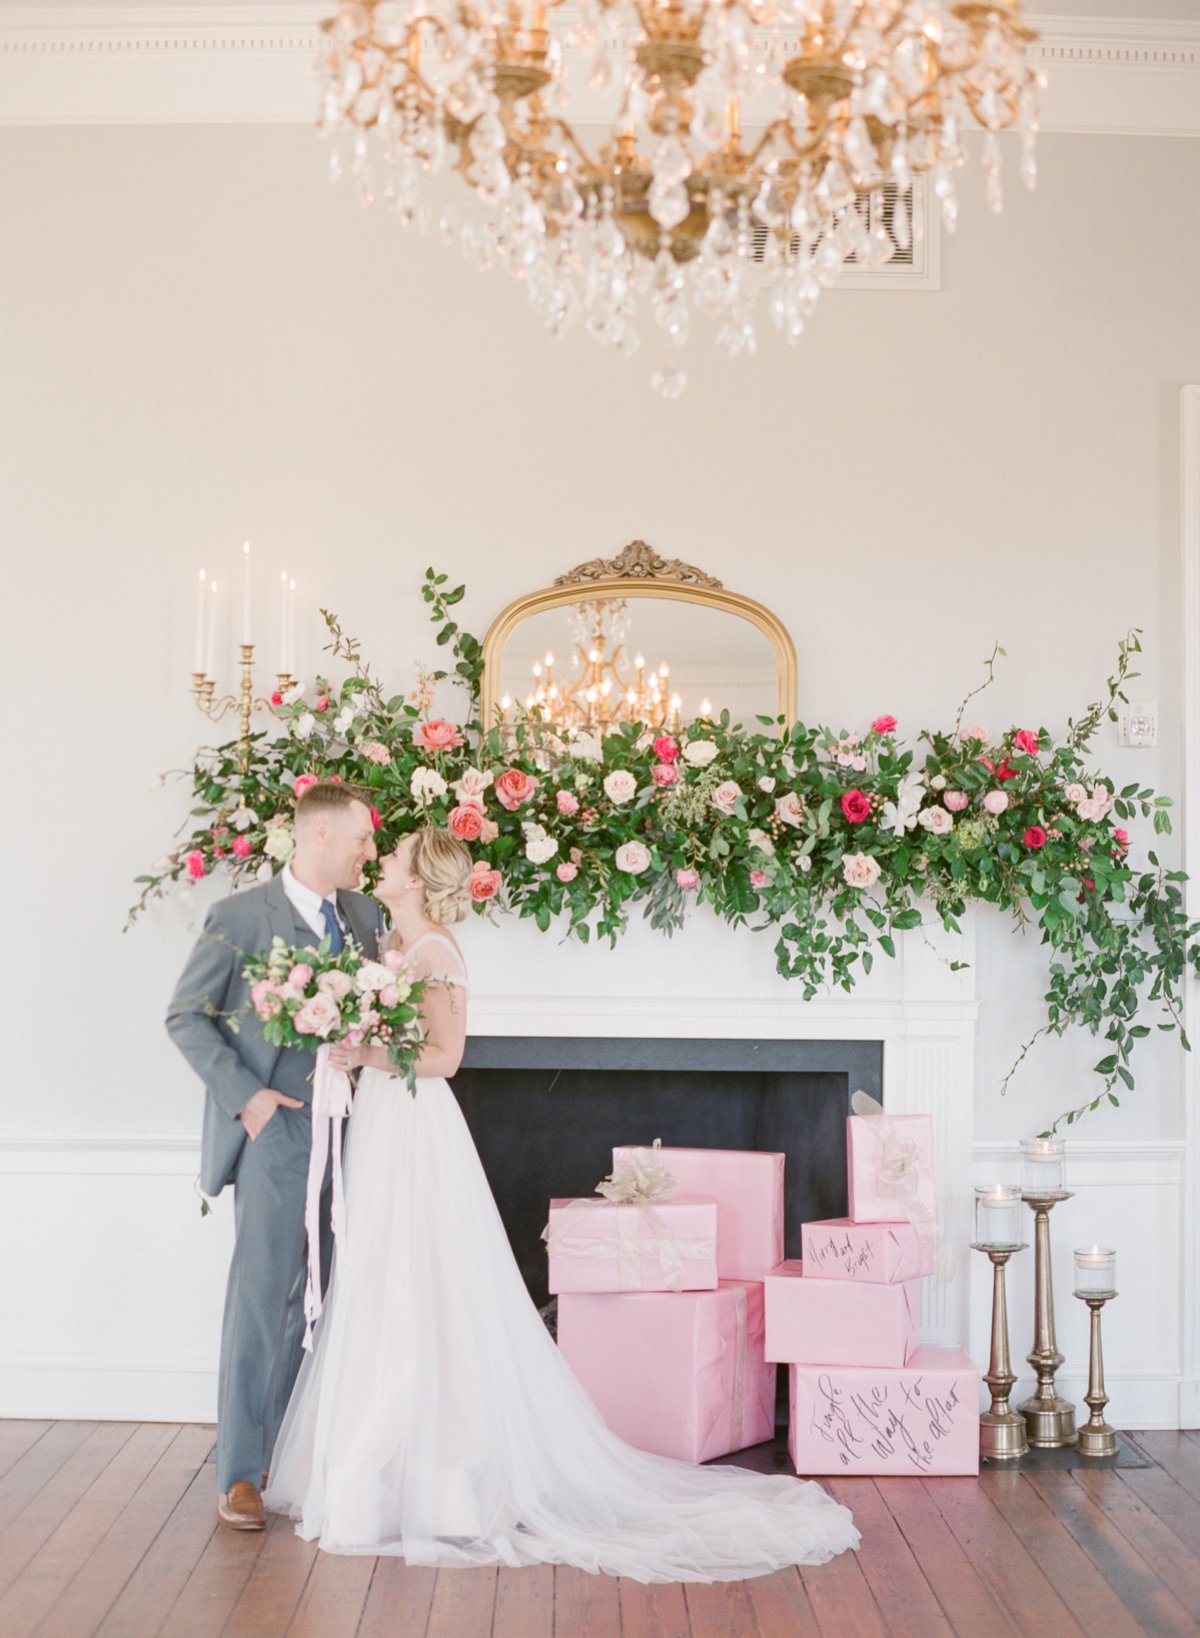 Elegant Pink and Green Wedding Ideas... with a Holiday Twist via TheELD.com